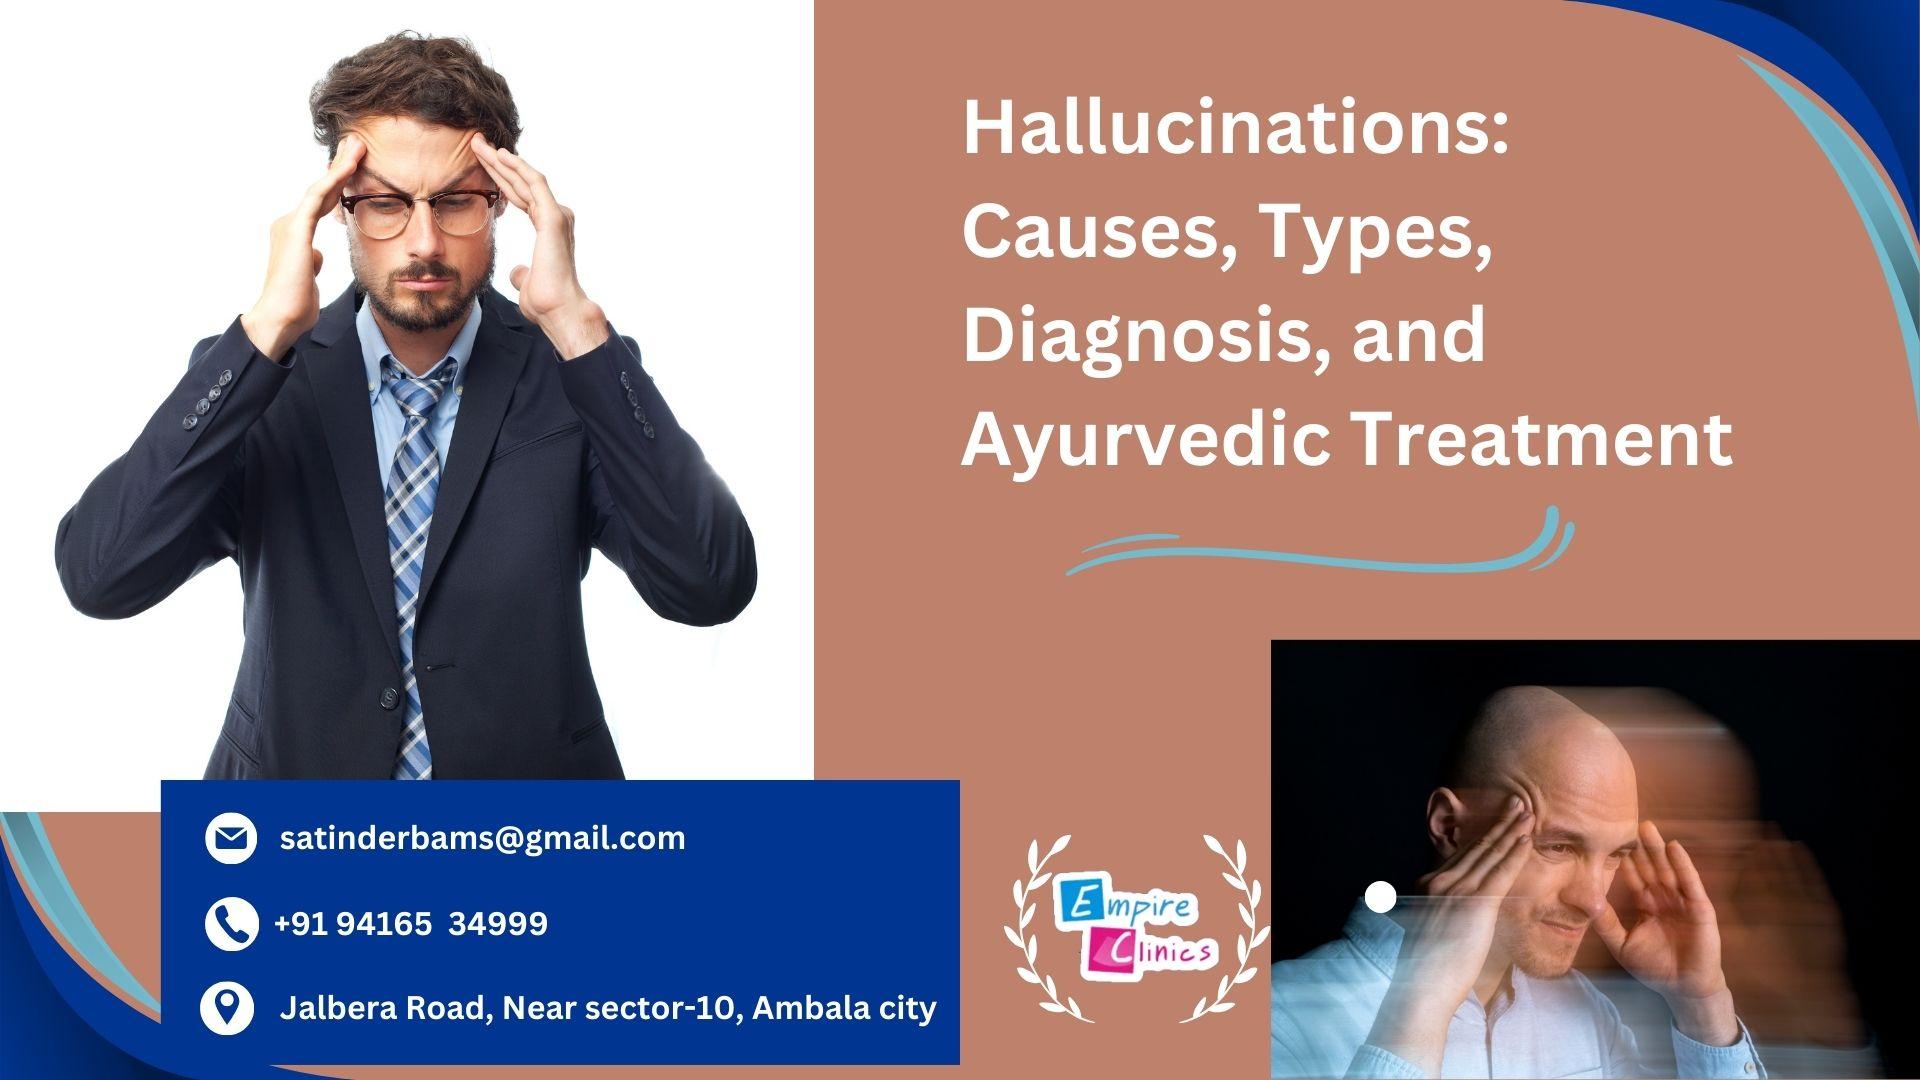 hallucinations-causes-types-diagnosis-and-ayurvedic-treatment